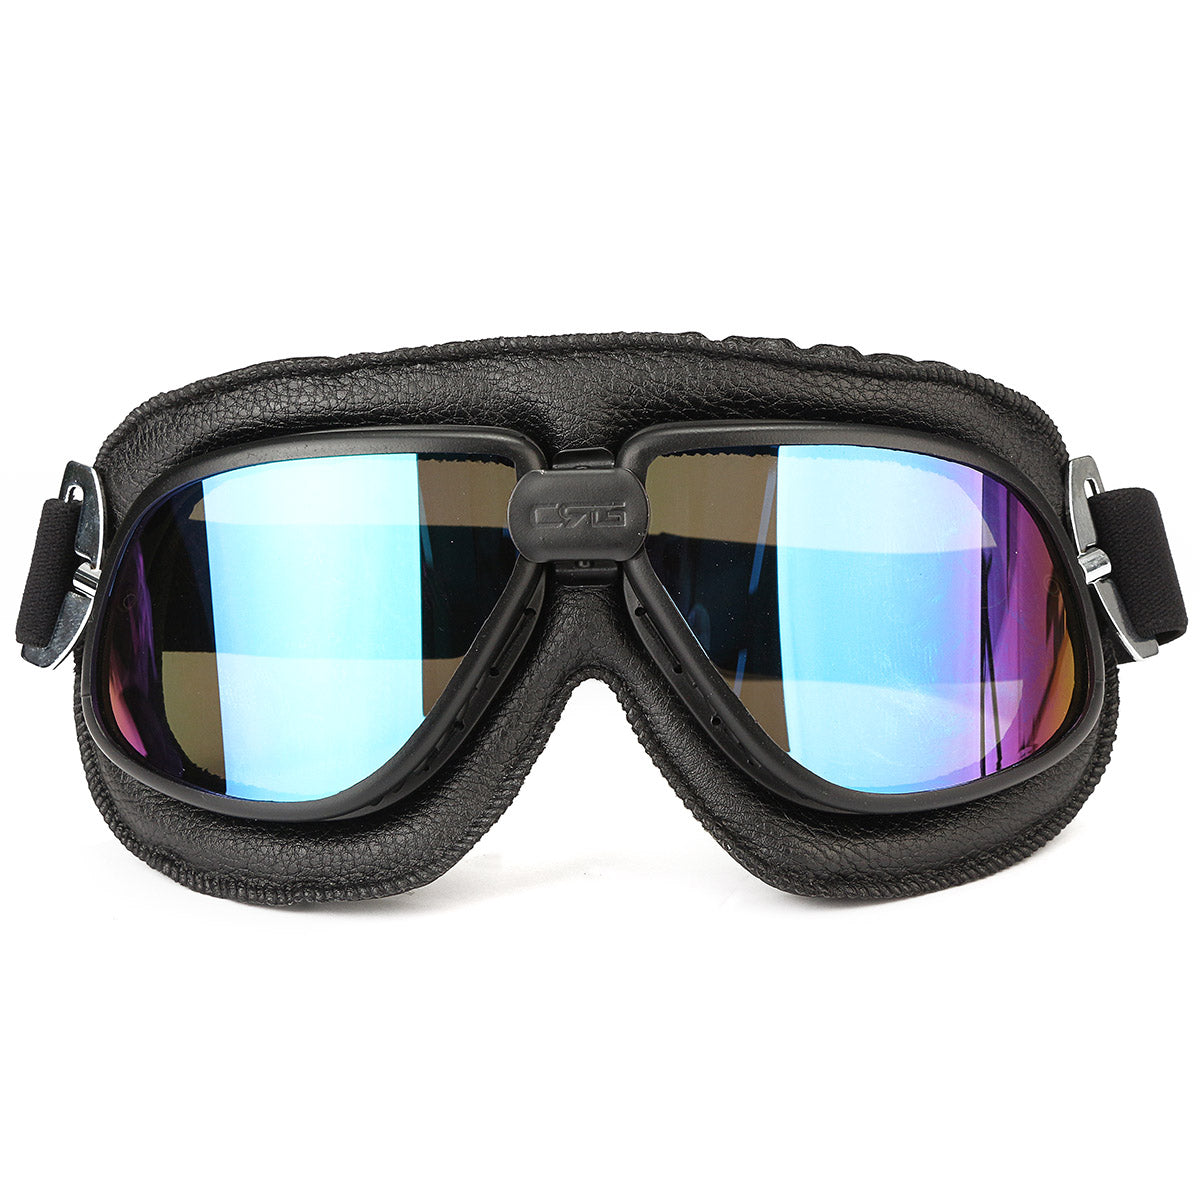 Light Cyan Motorcycle Goggles Scooter Helmet Leather Anti UV Fog Protector Glasses